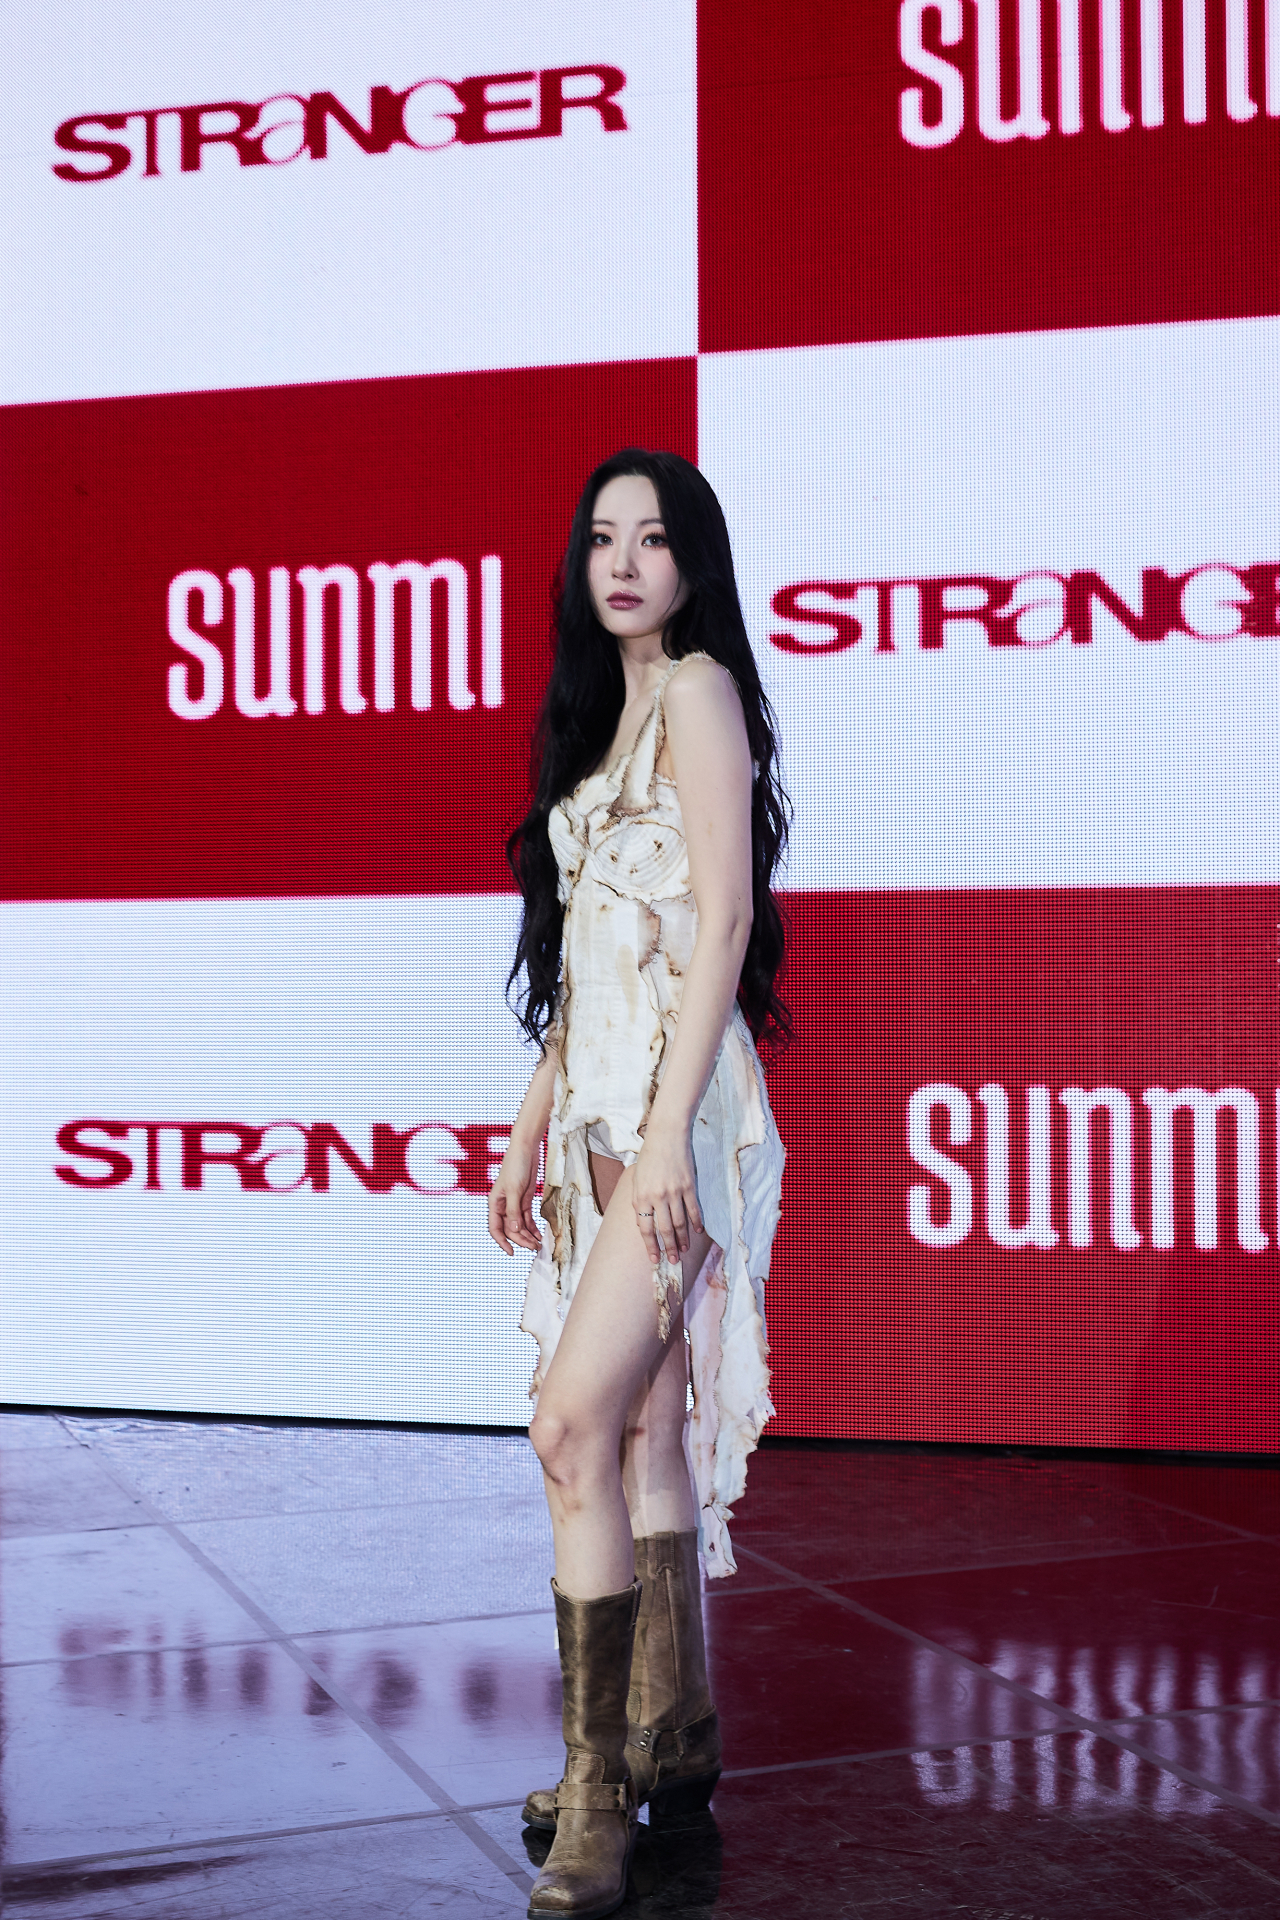 Sunmi poses for picture at a conference for her new single, 